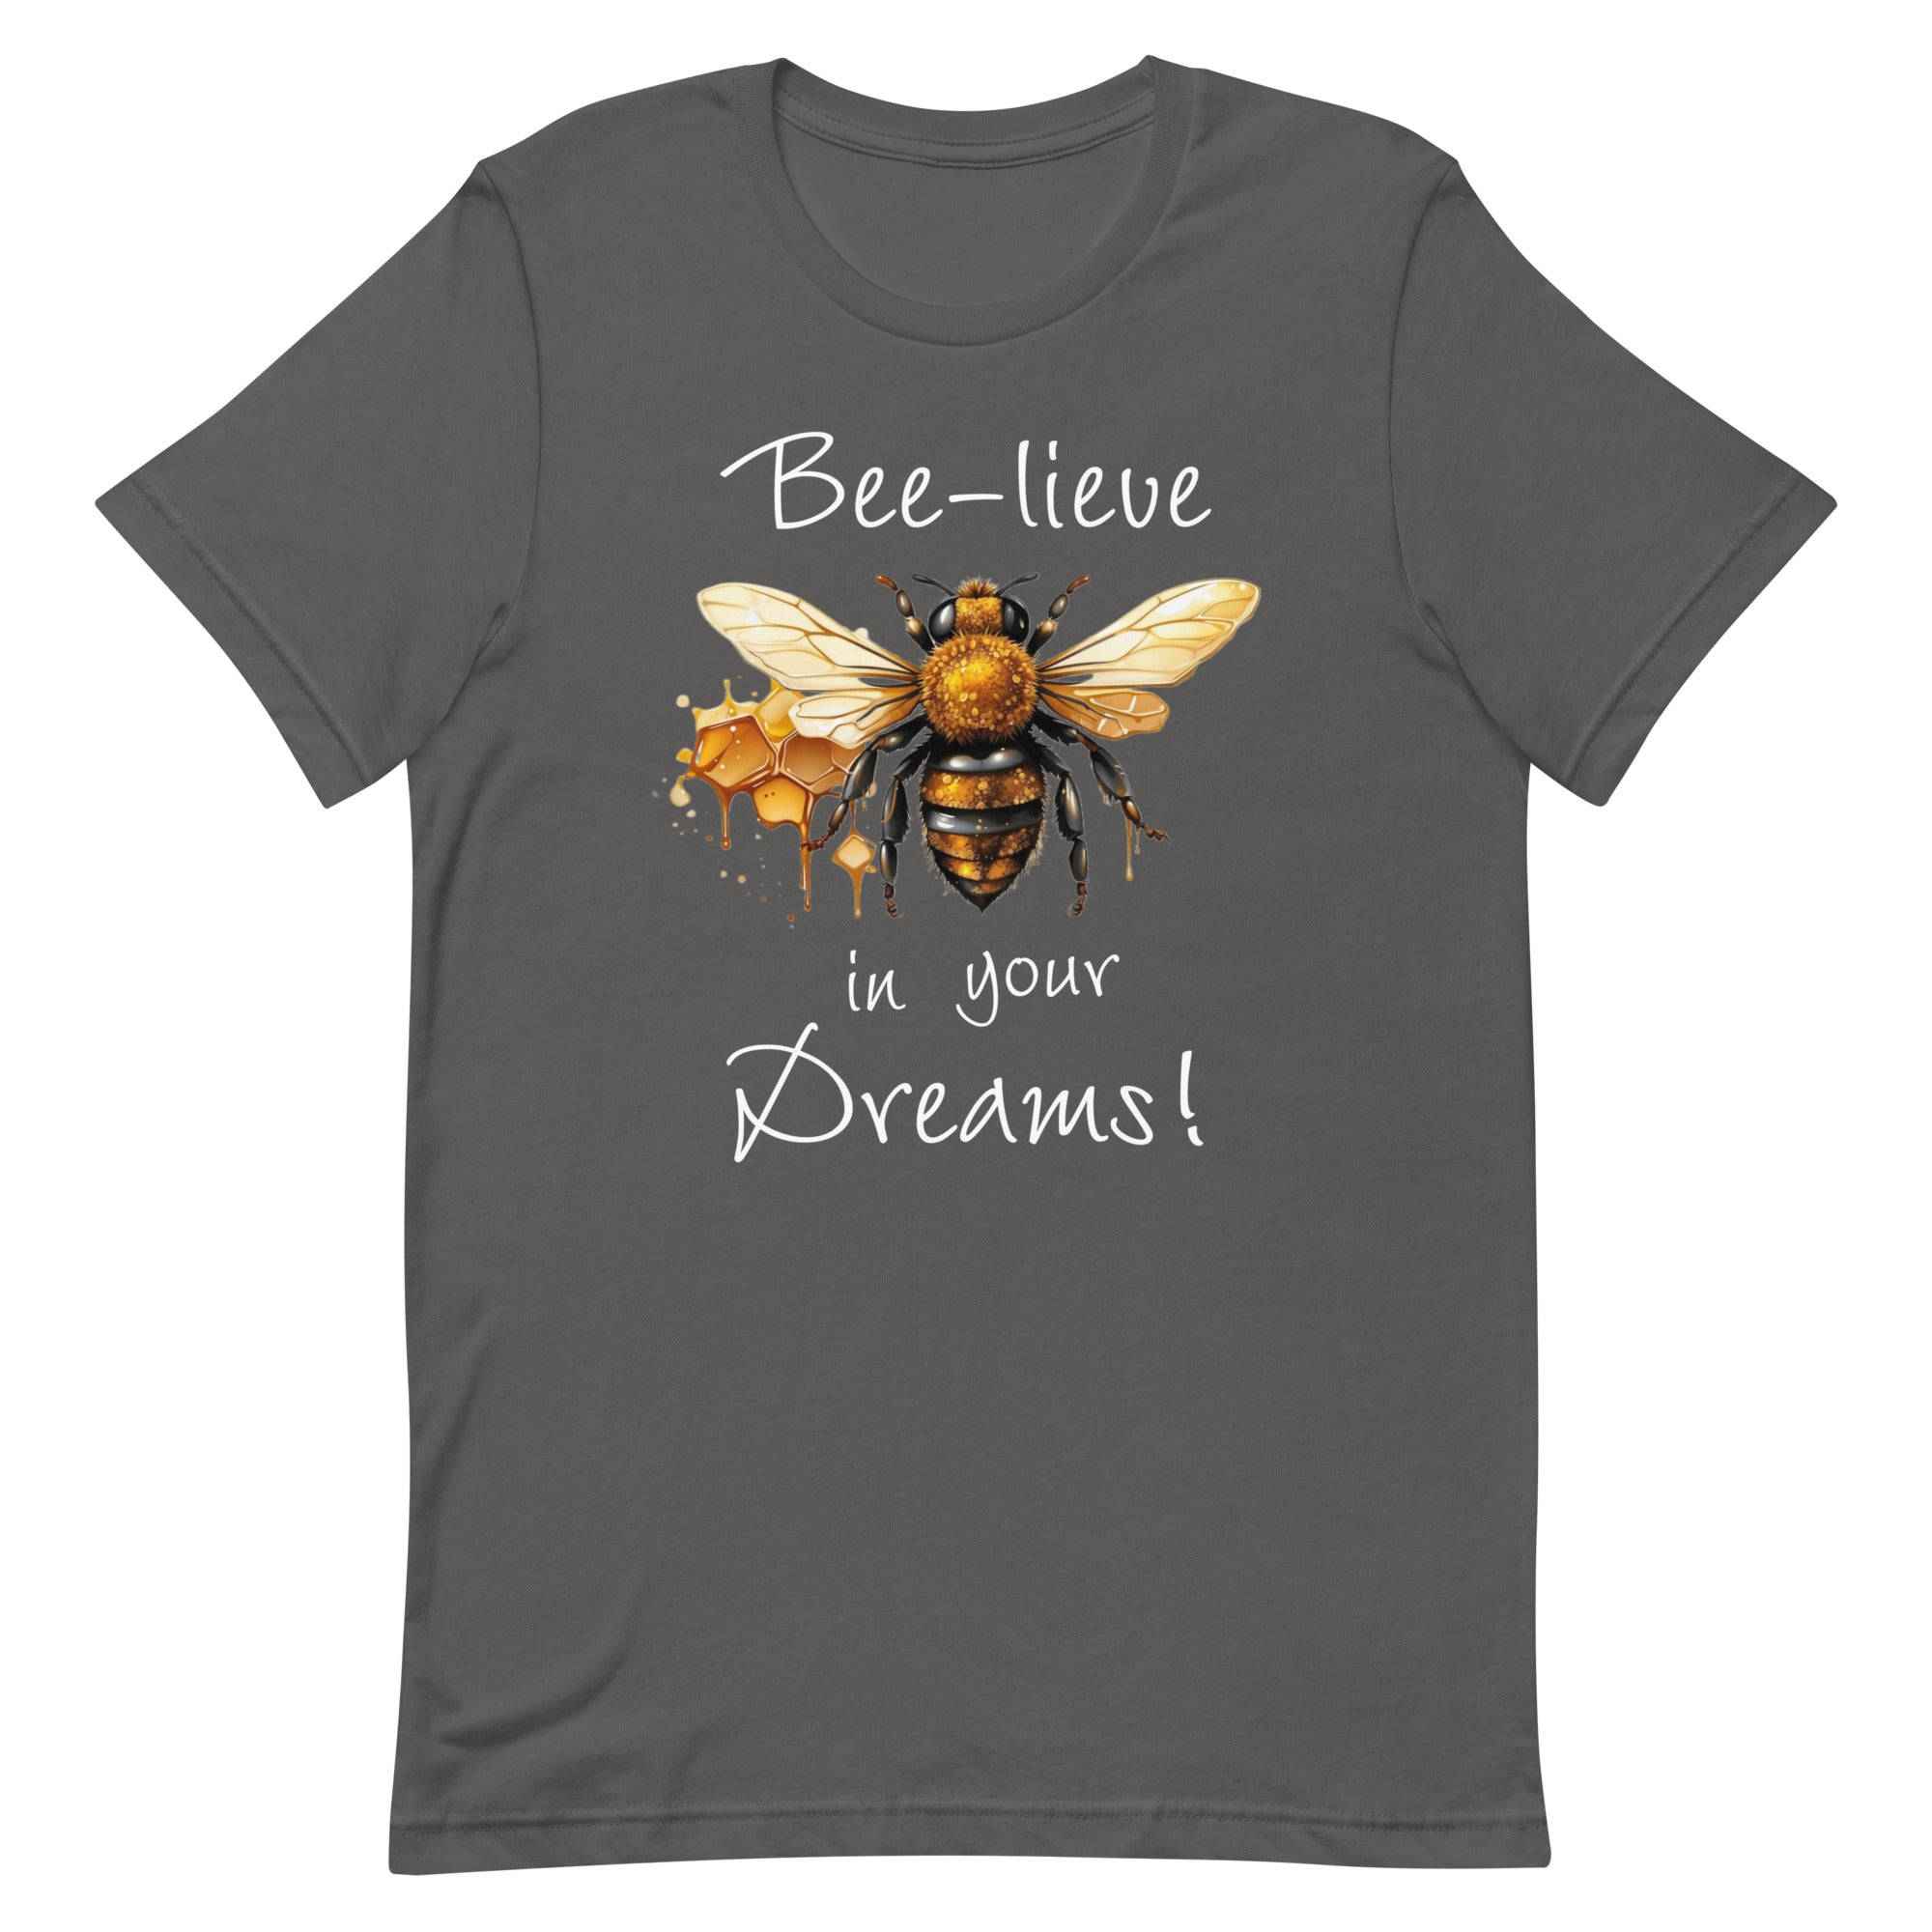 Bee-lieve in Your Dreams T-Shirt, Gift for Bee Lovers Asphalt S M L XL DenBox